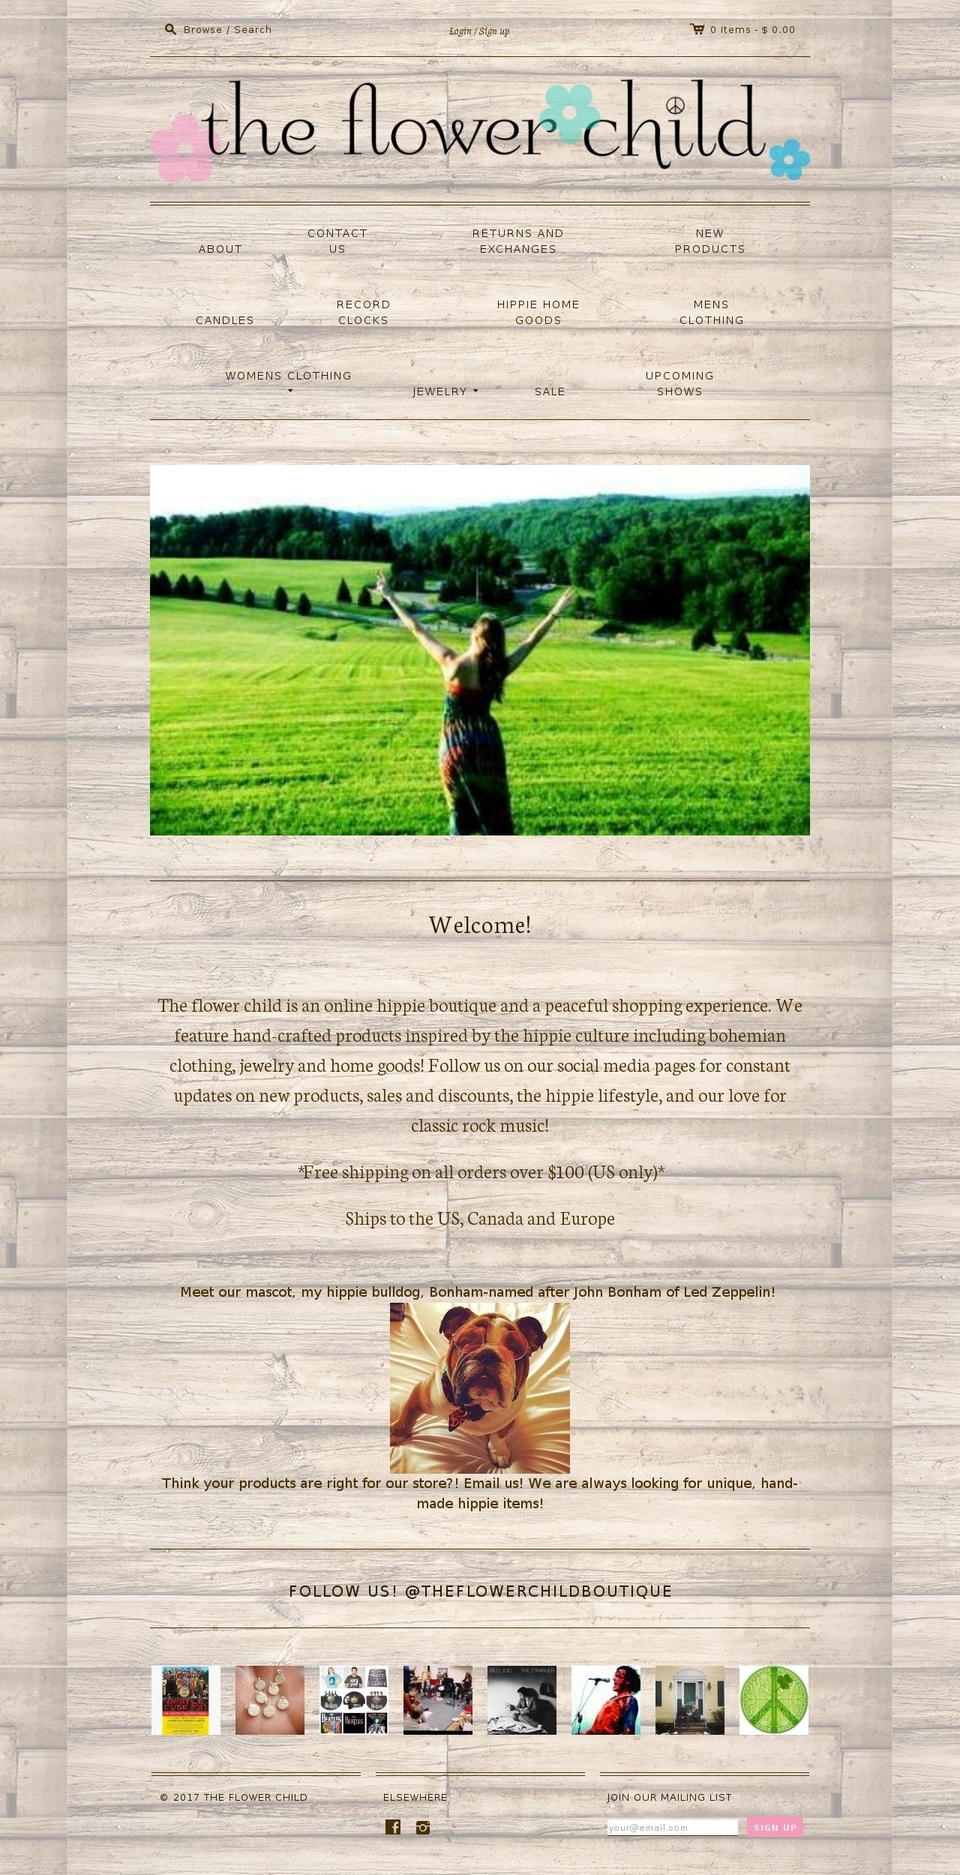 Editions Shopify theme site example theflowerchild.com